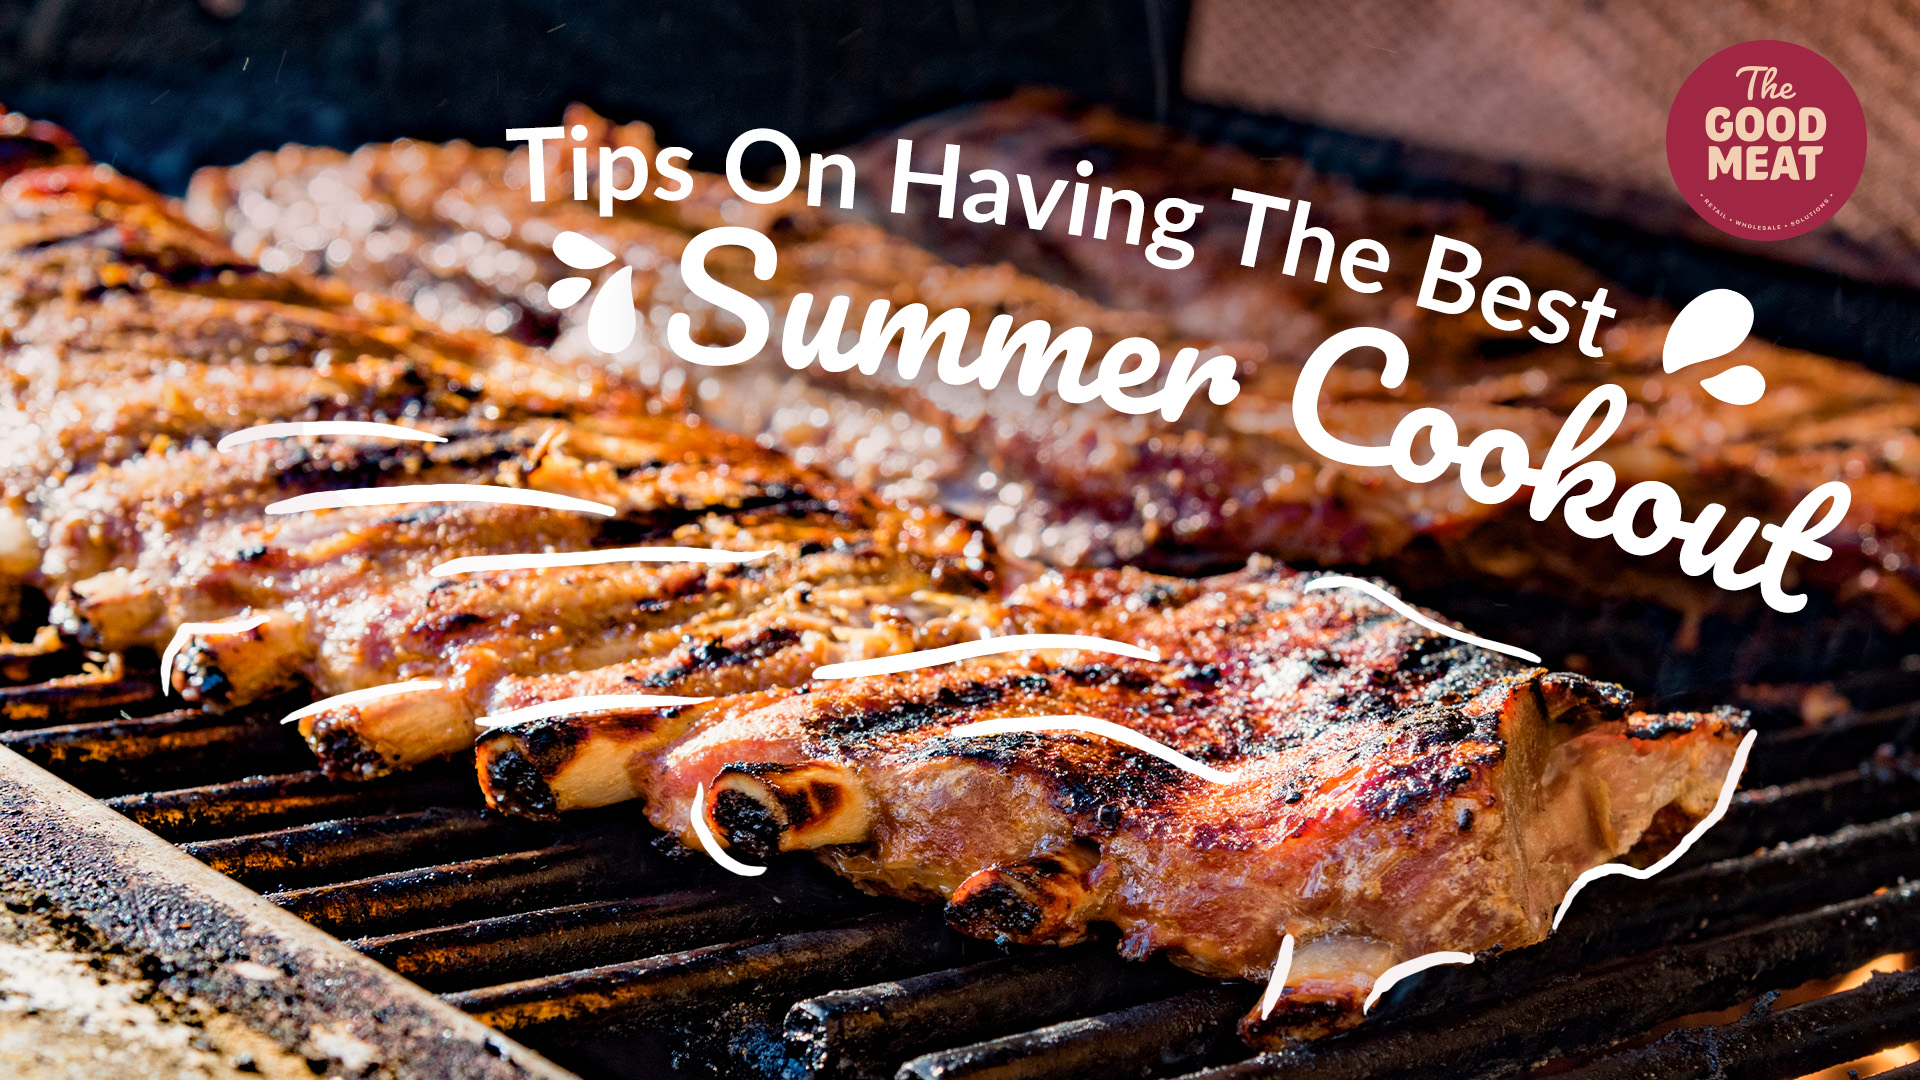 Tips On Having The Best Summer Cookout